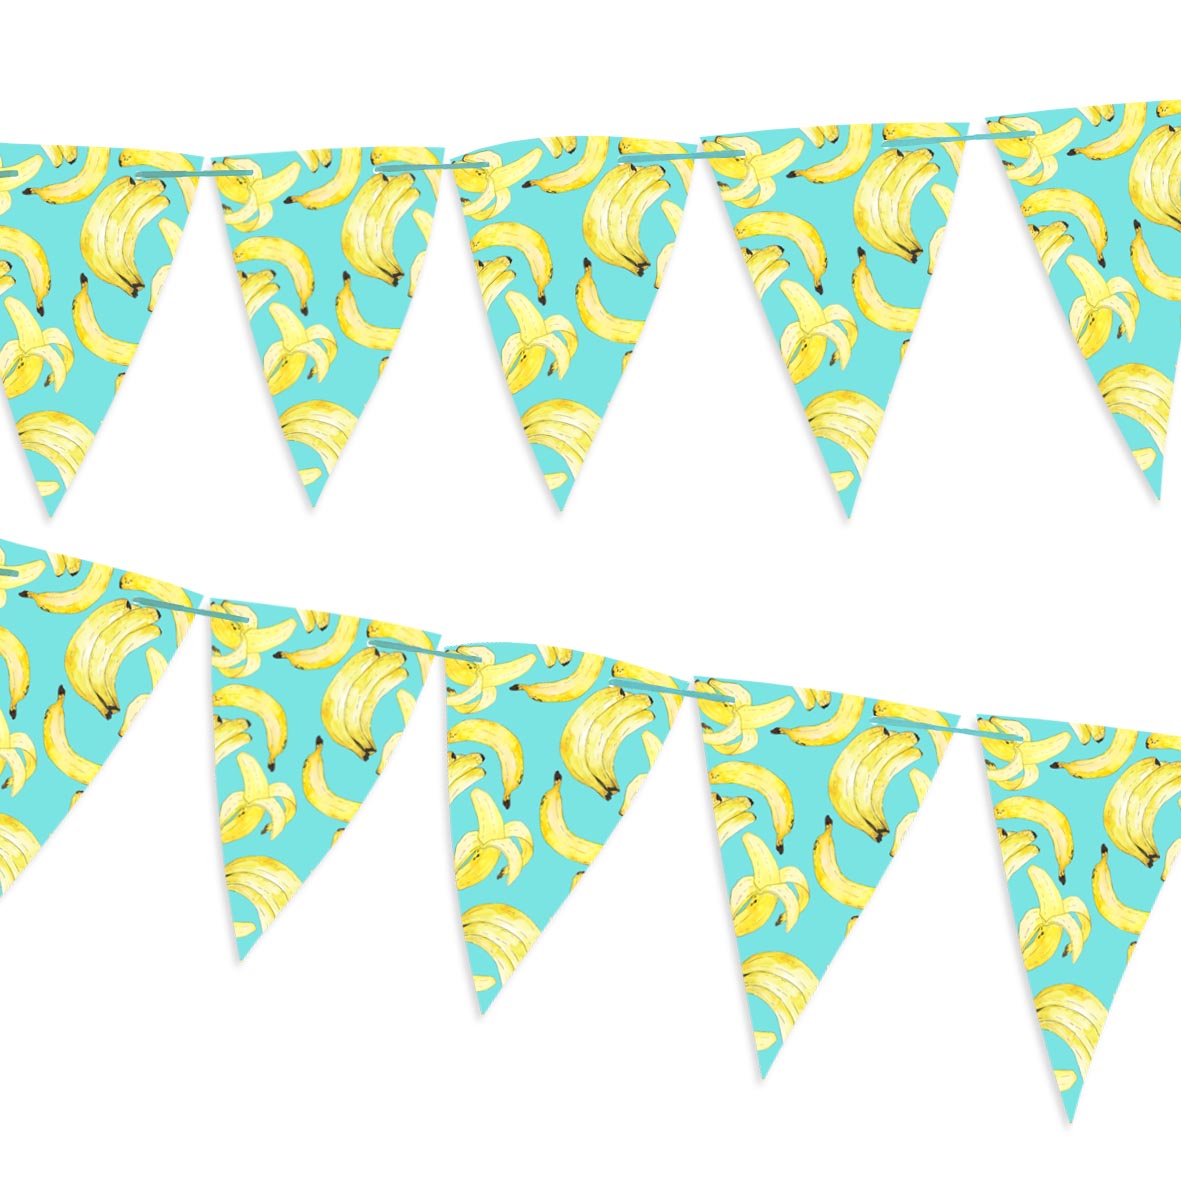 Blue bunting covered in bananas. The flags are on a blue ribbon